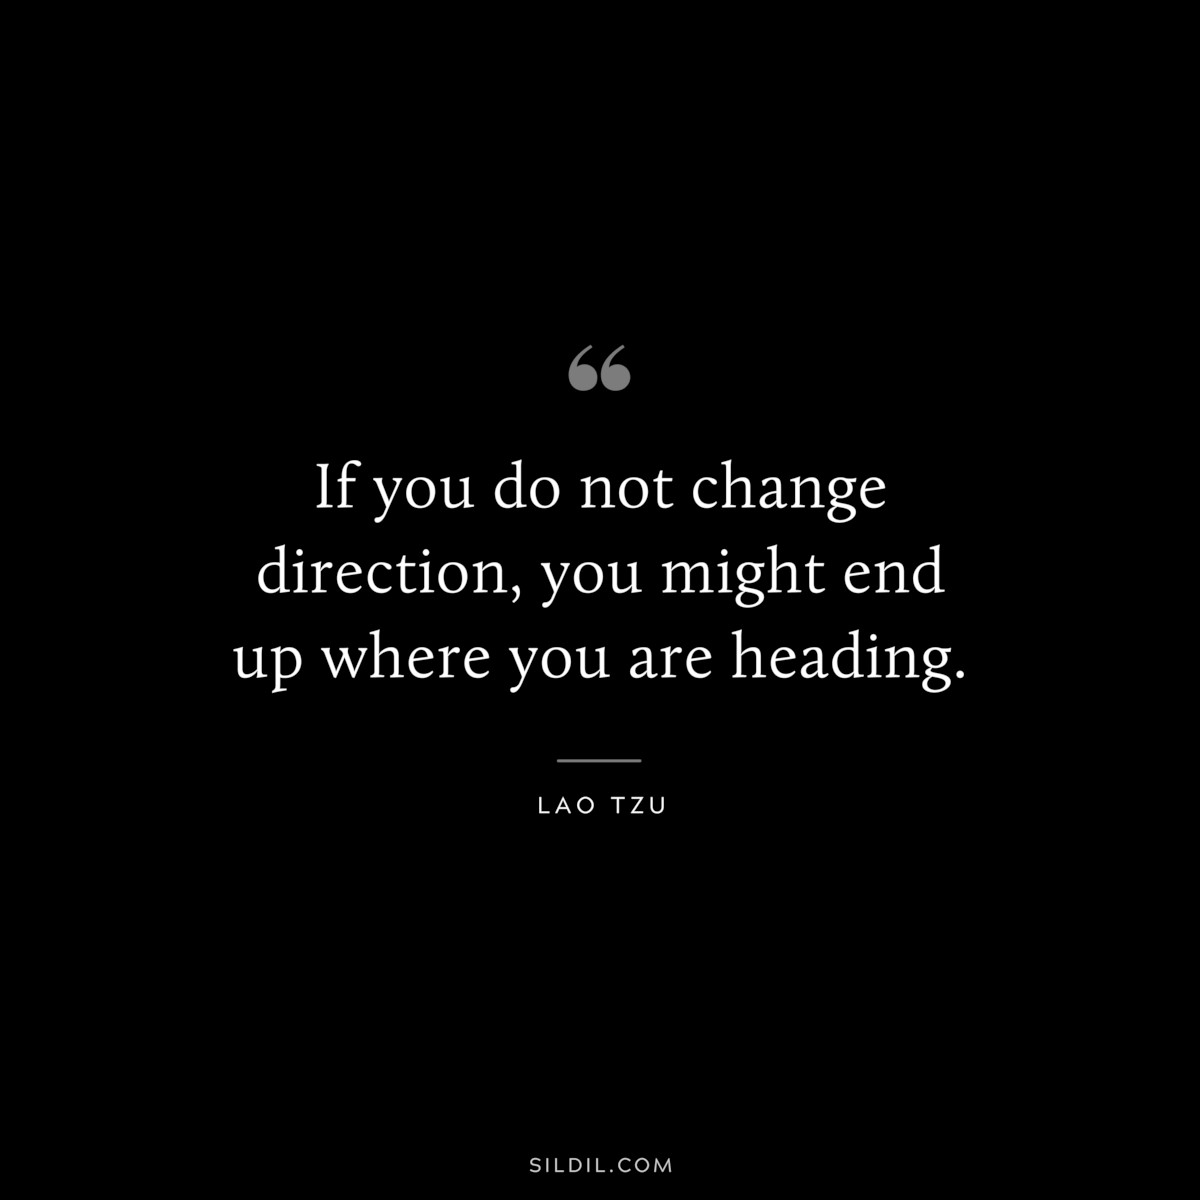 If you do not change direction, you might end up where you are heading. ― Lao Tzu